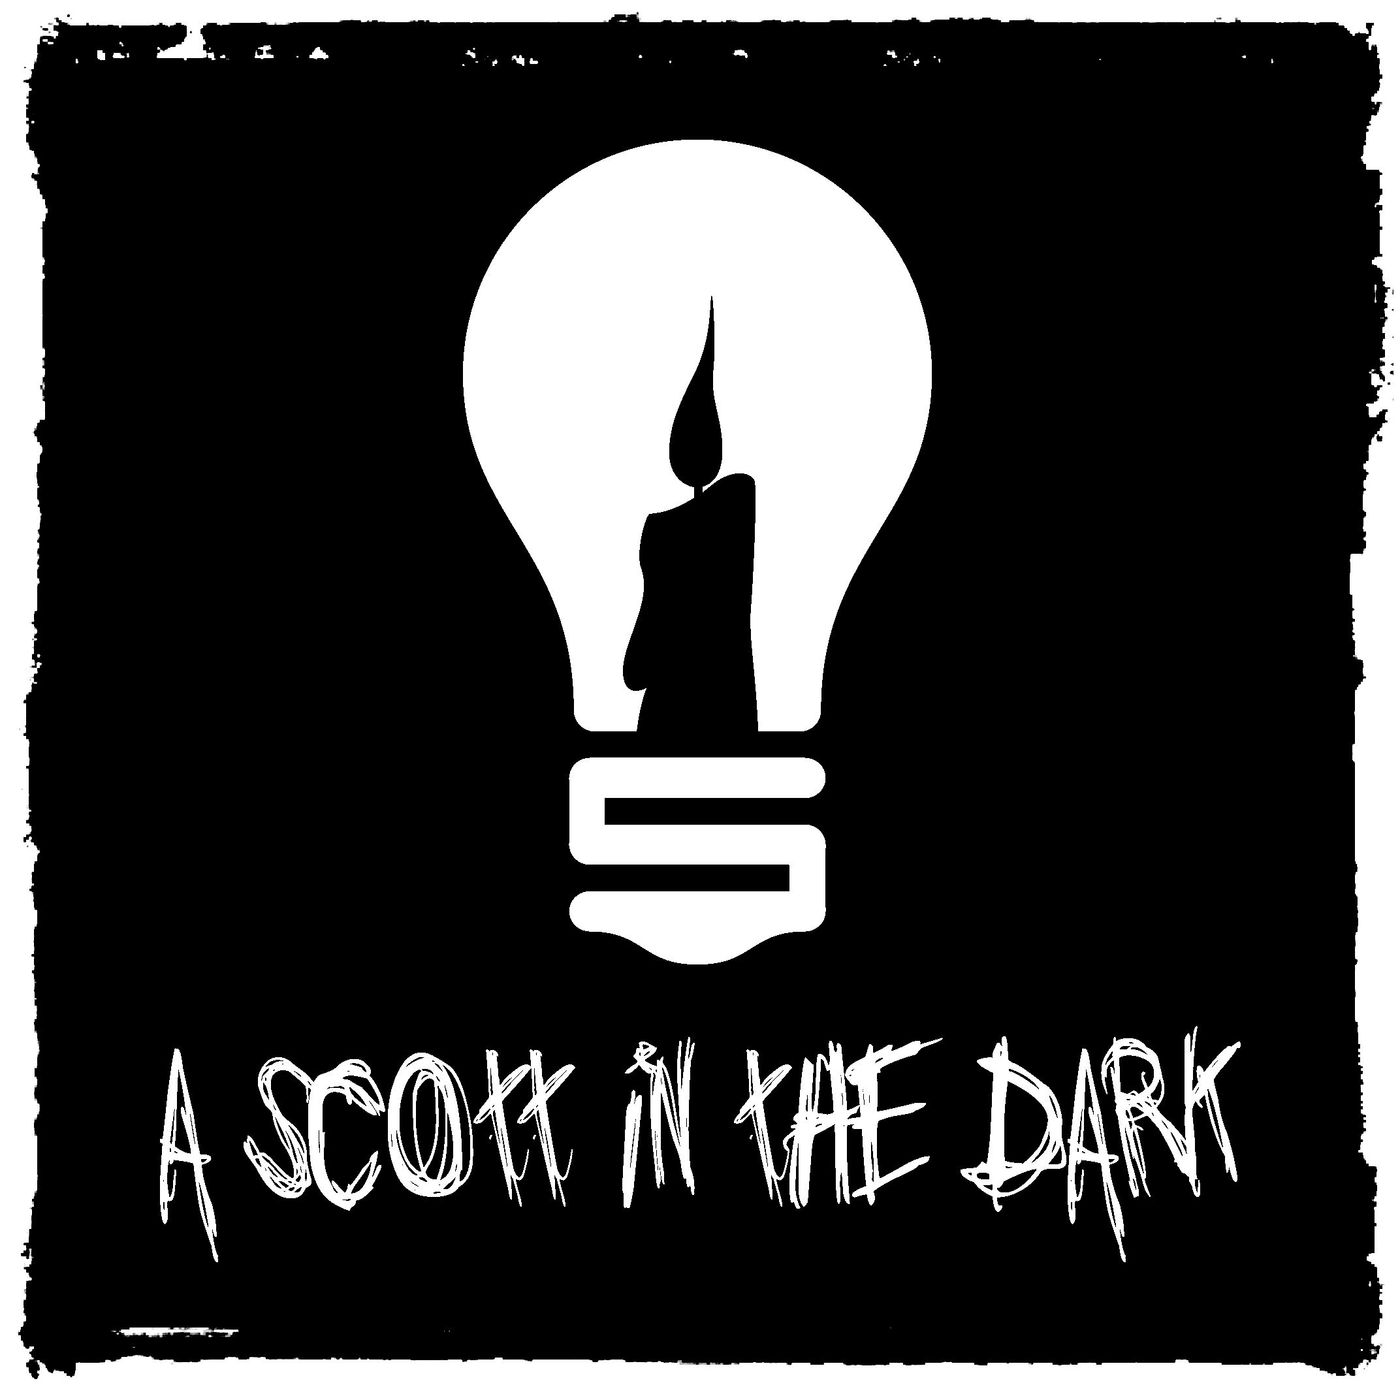 [A Scott in the Dark] Episode 31 - Hey Gang Lets Put on a Show